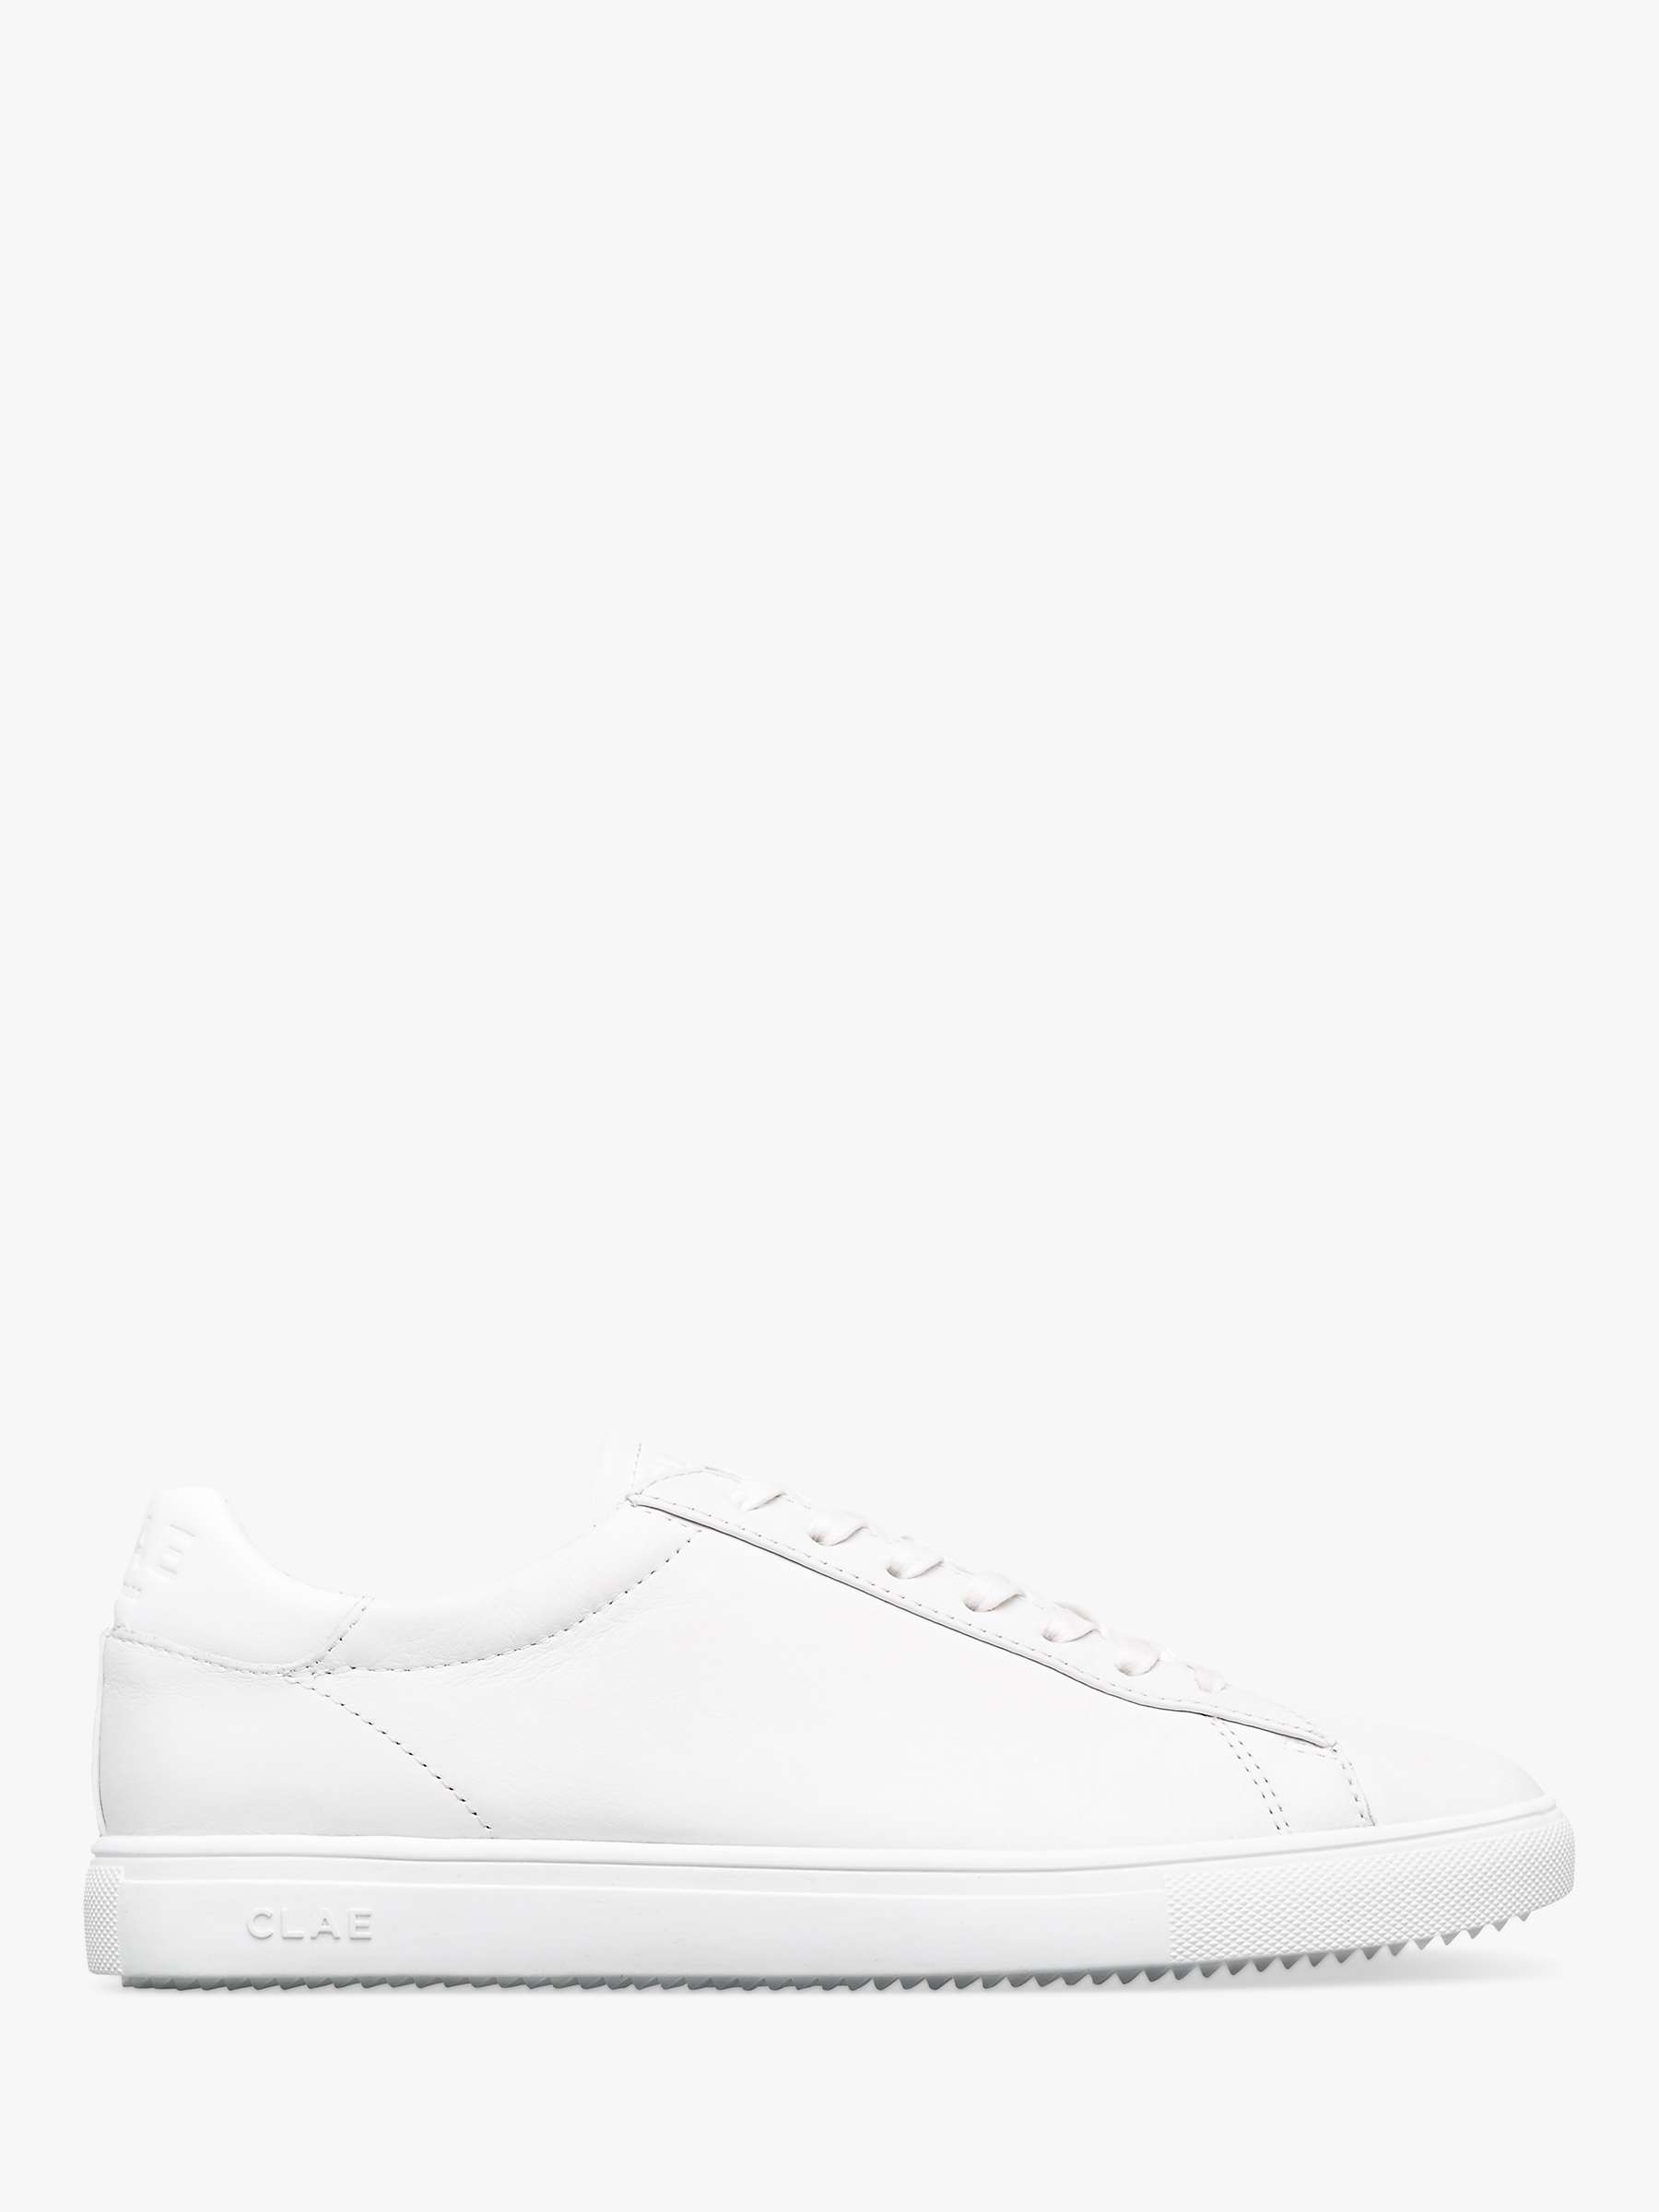 Buy CLAE Bradley Essential Leather Trainers, White Online at johnlewis.com